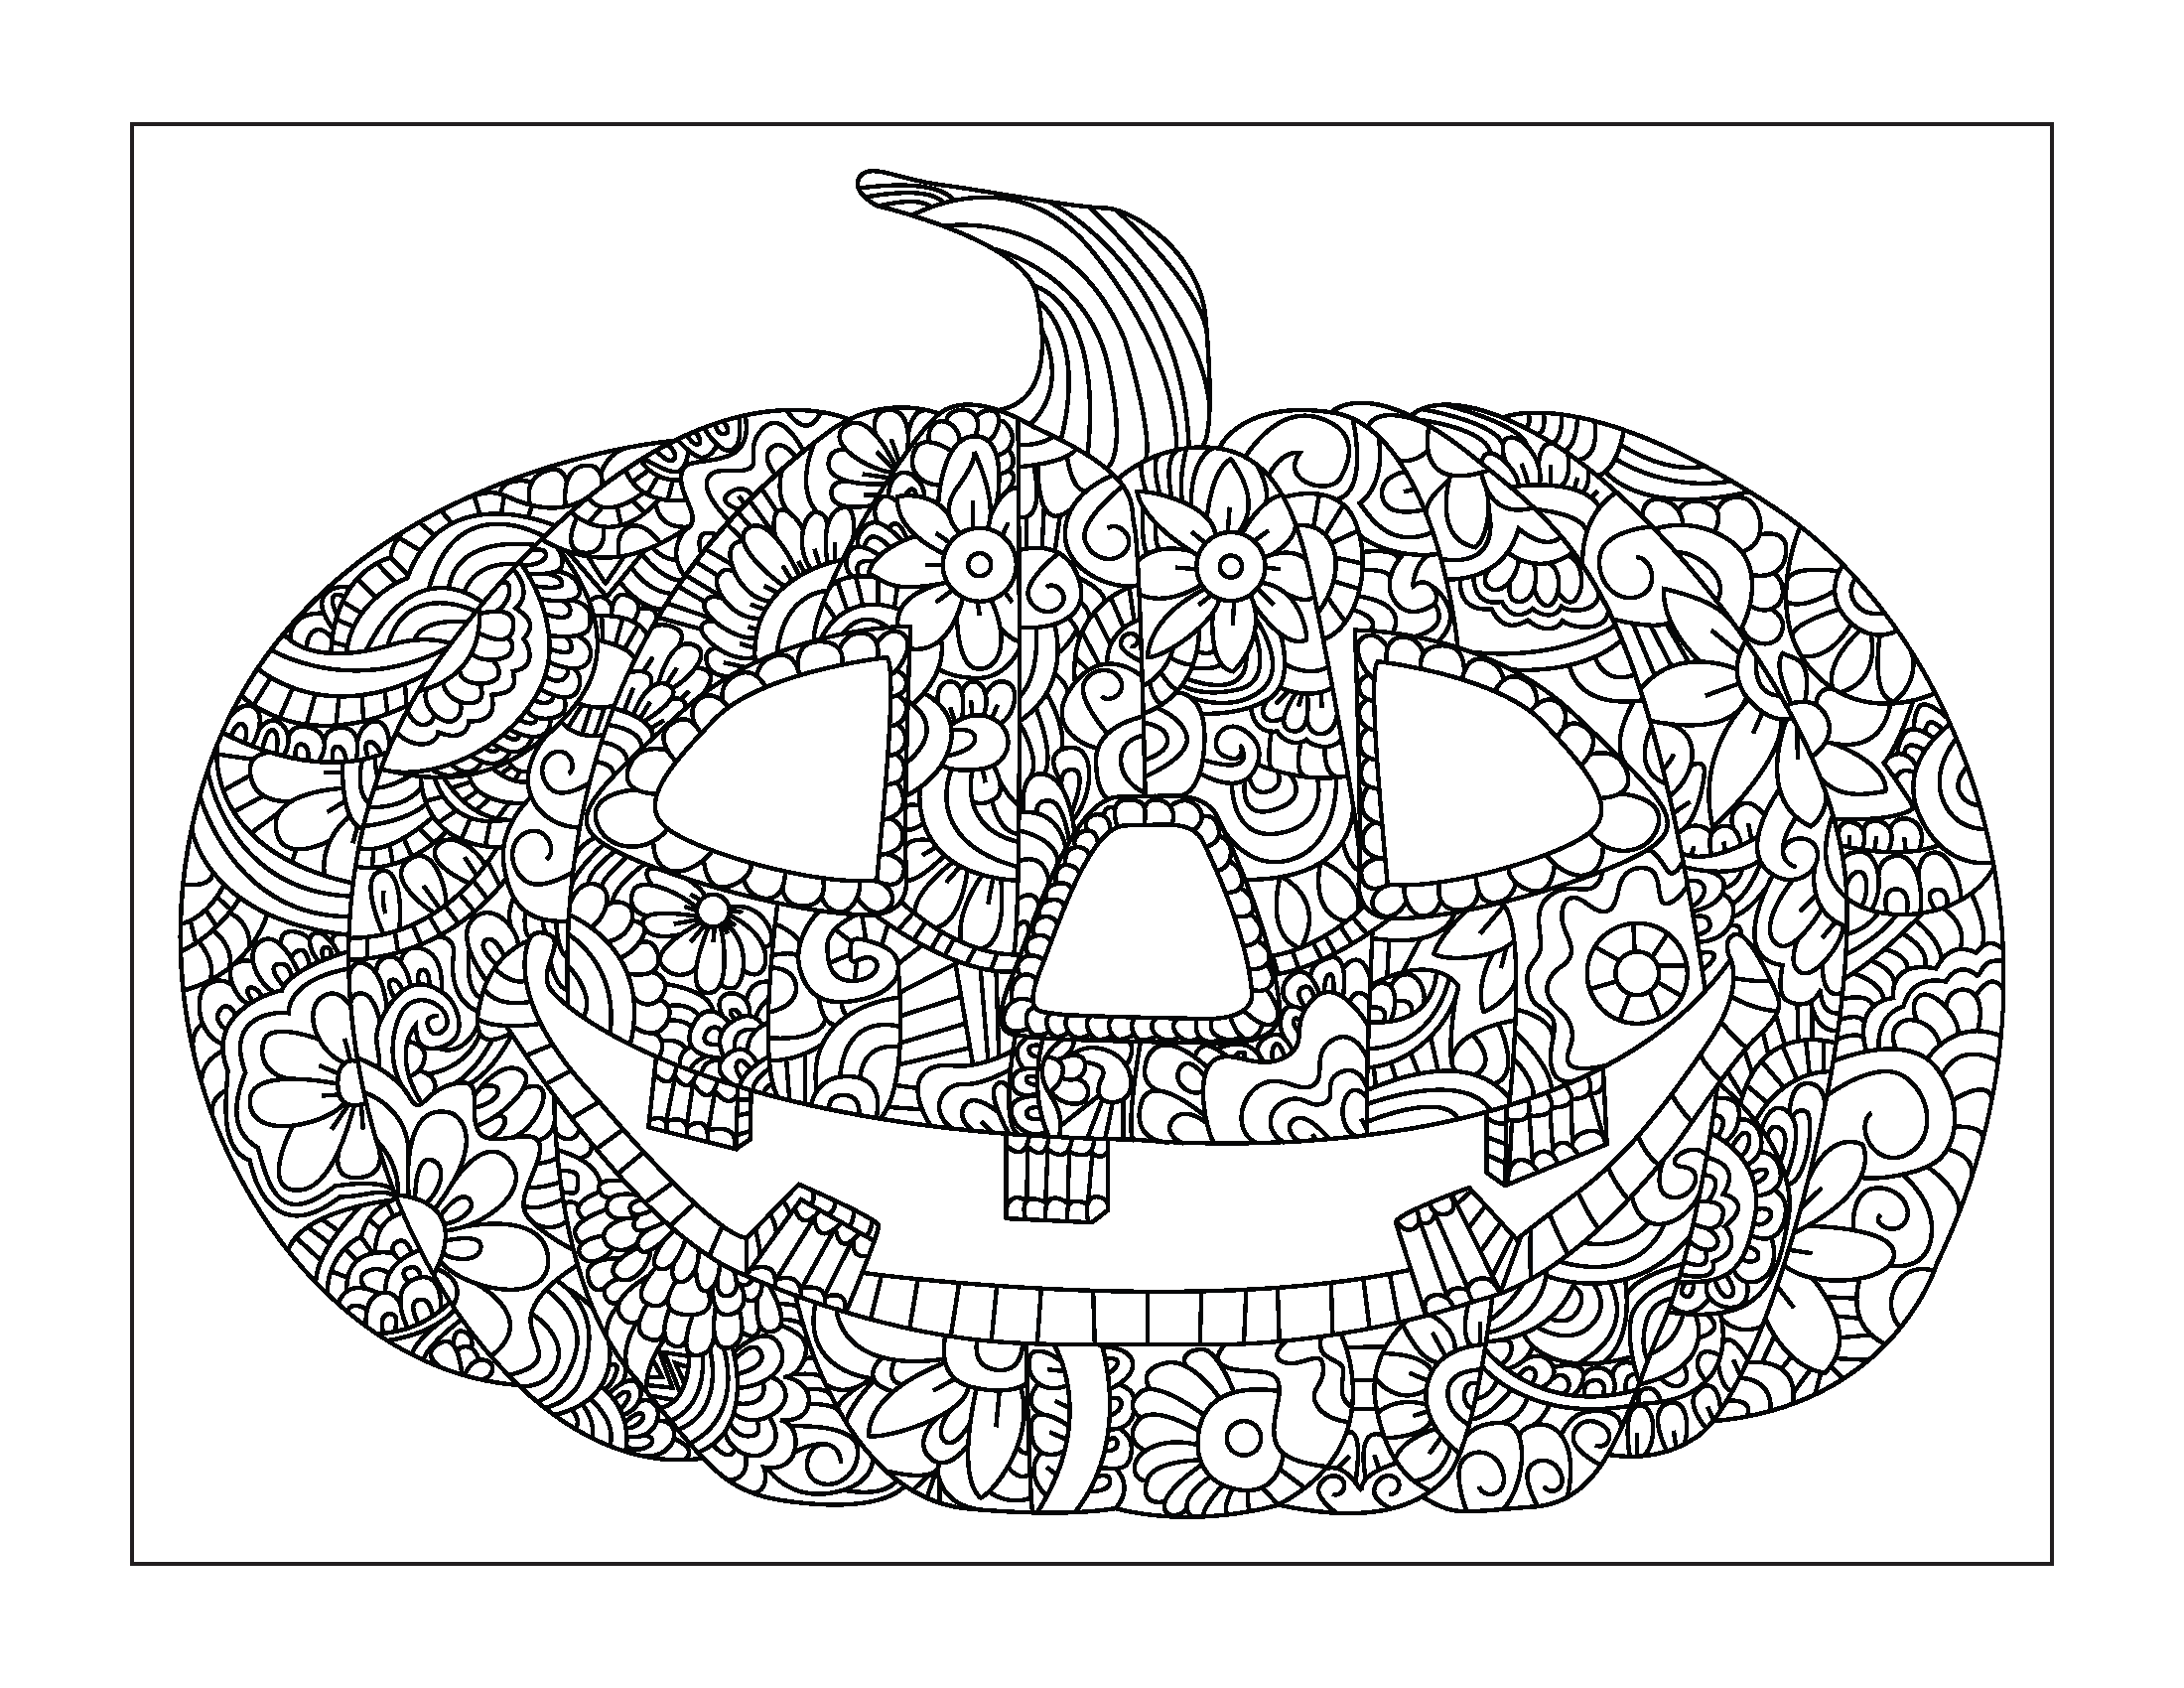 Halloween Coloring Pages (for older kids) - Gift of Curiosity